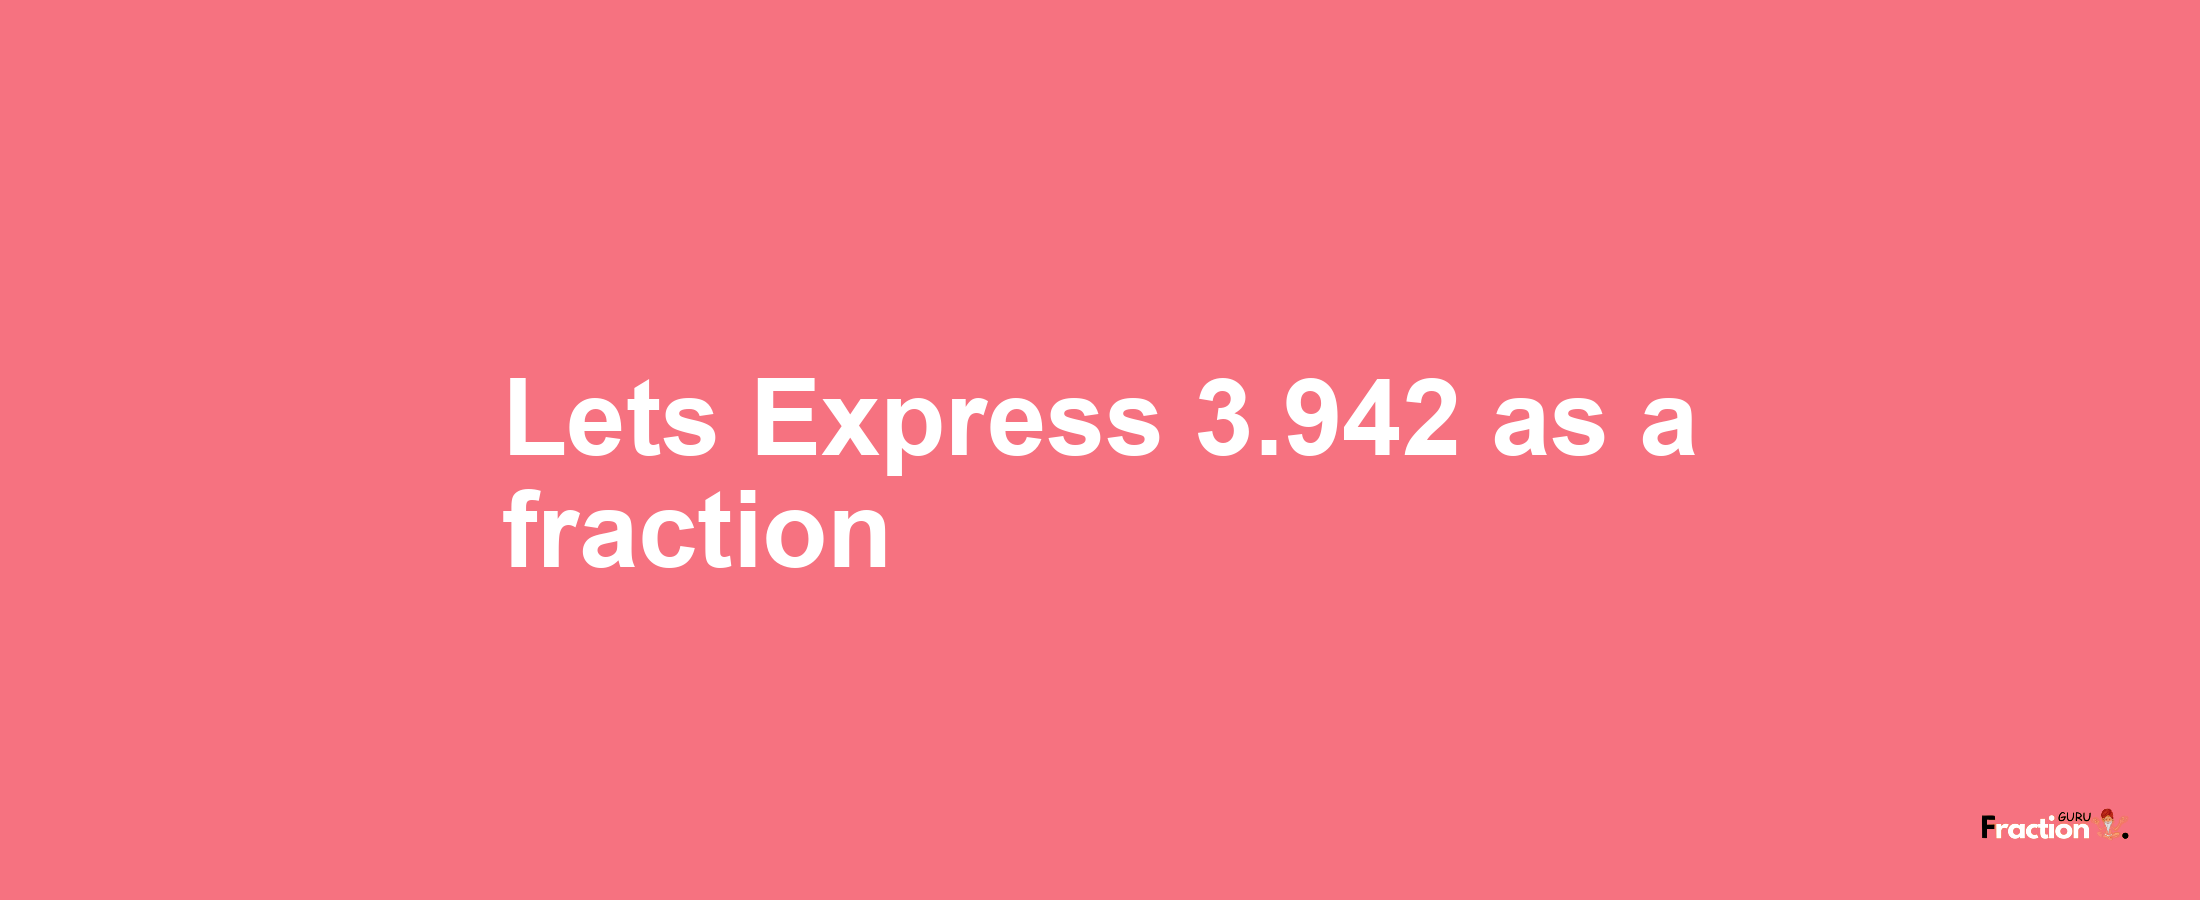 Lets Express 3.942 as afraction